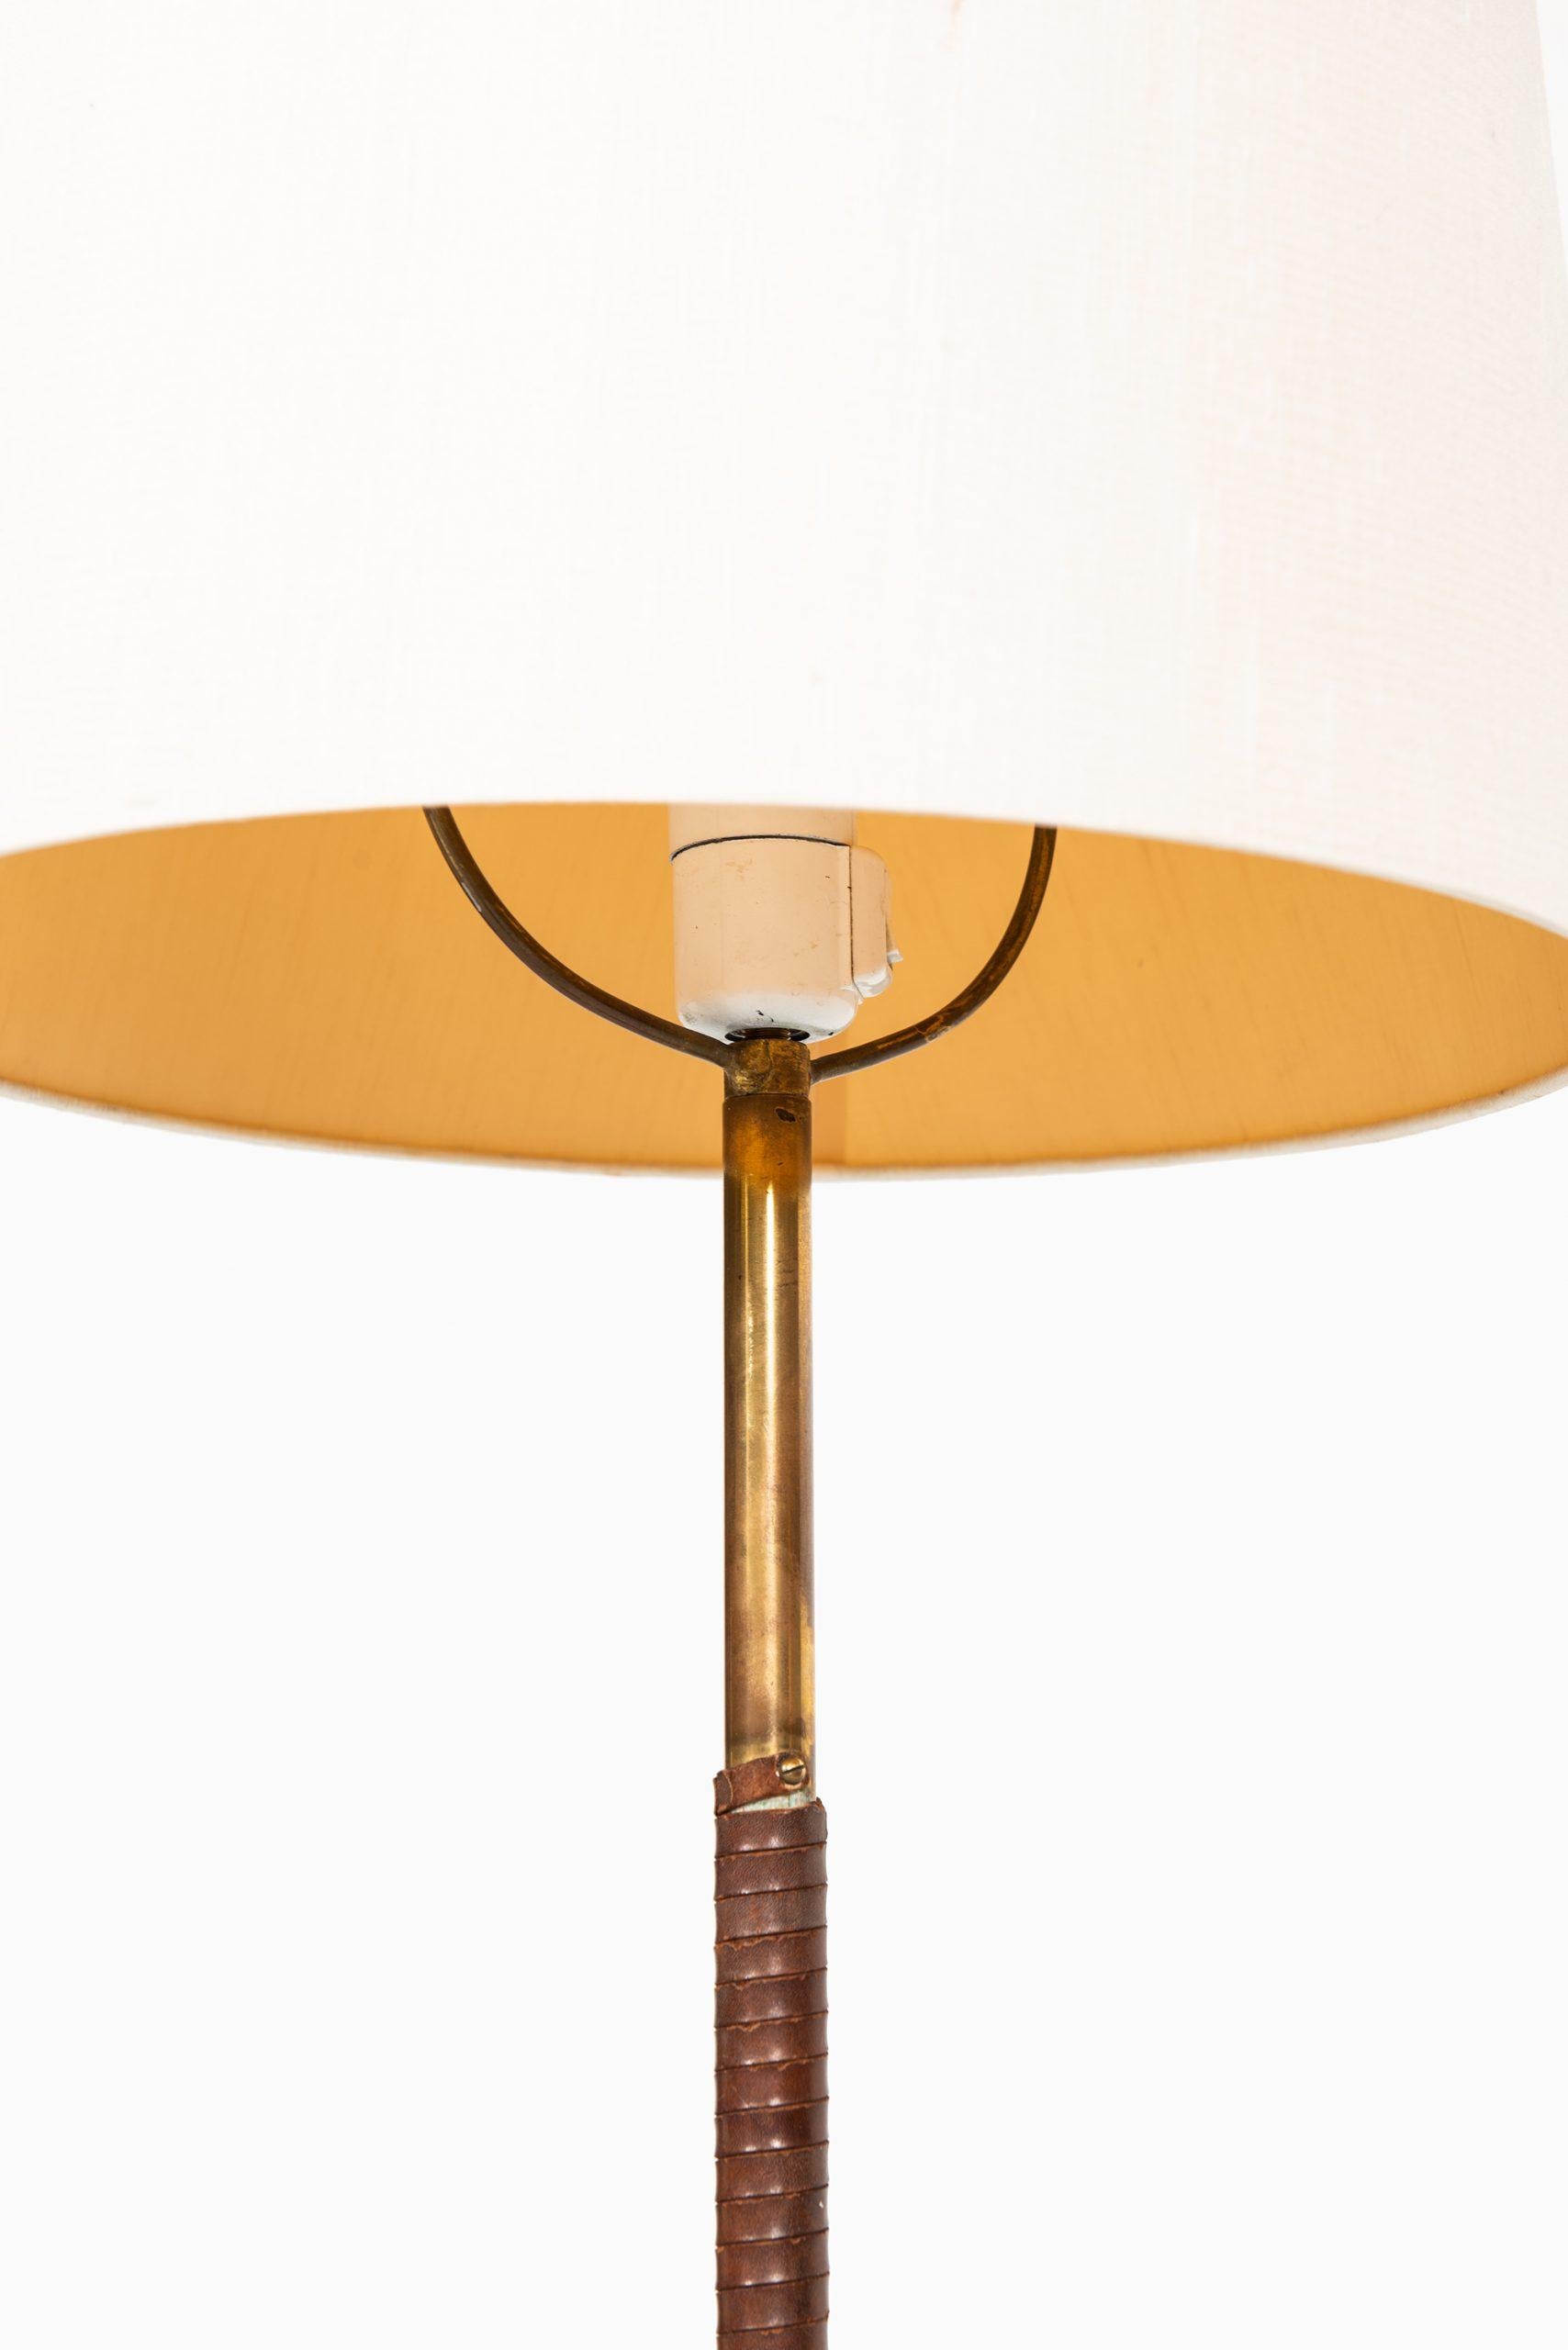 Scandinavian Modern Floor Lamp Attributed to Paavo Tynell Produced in Finland